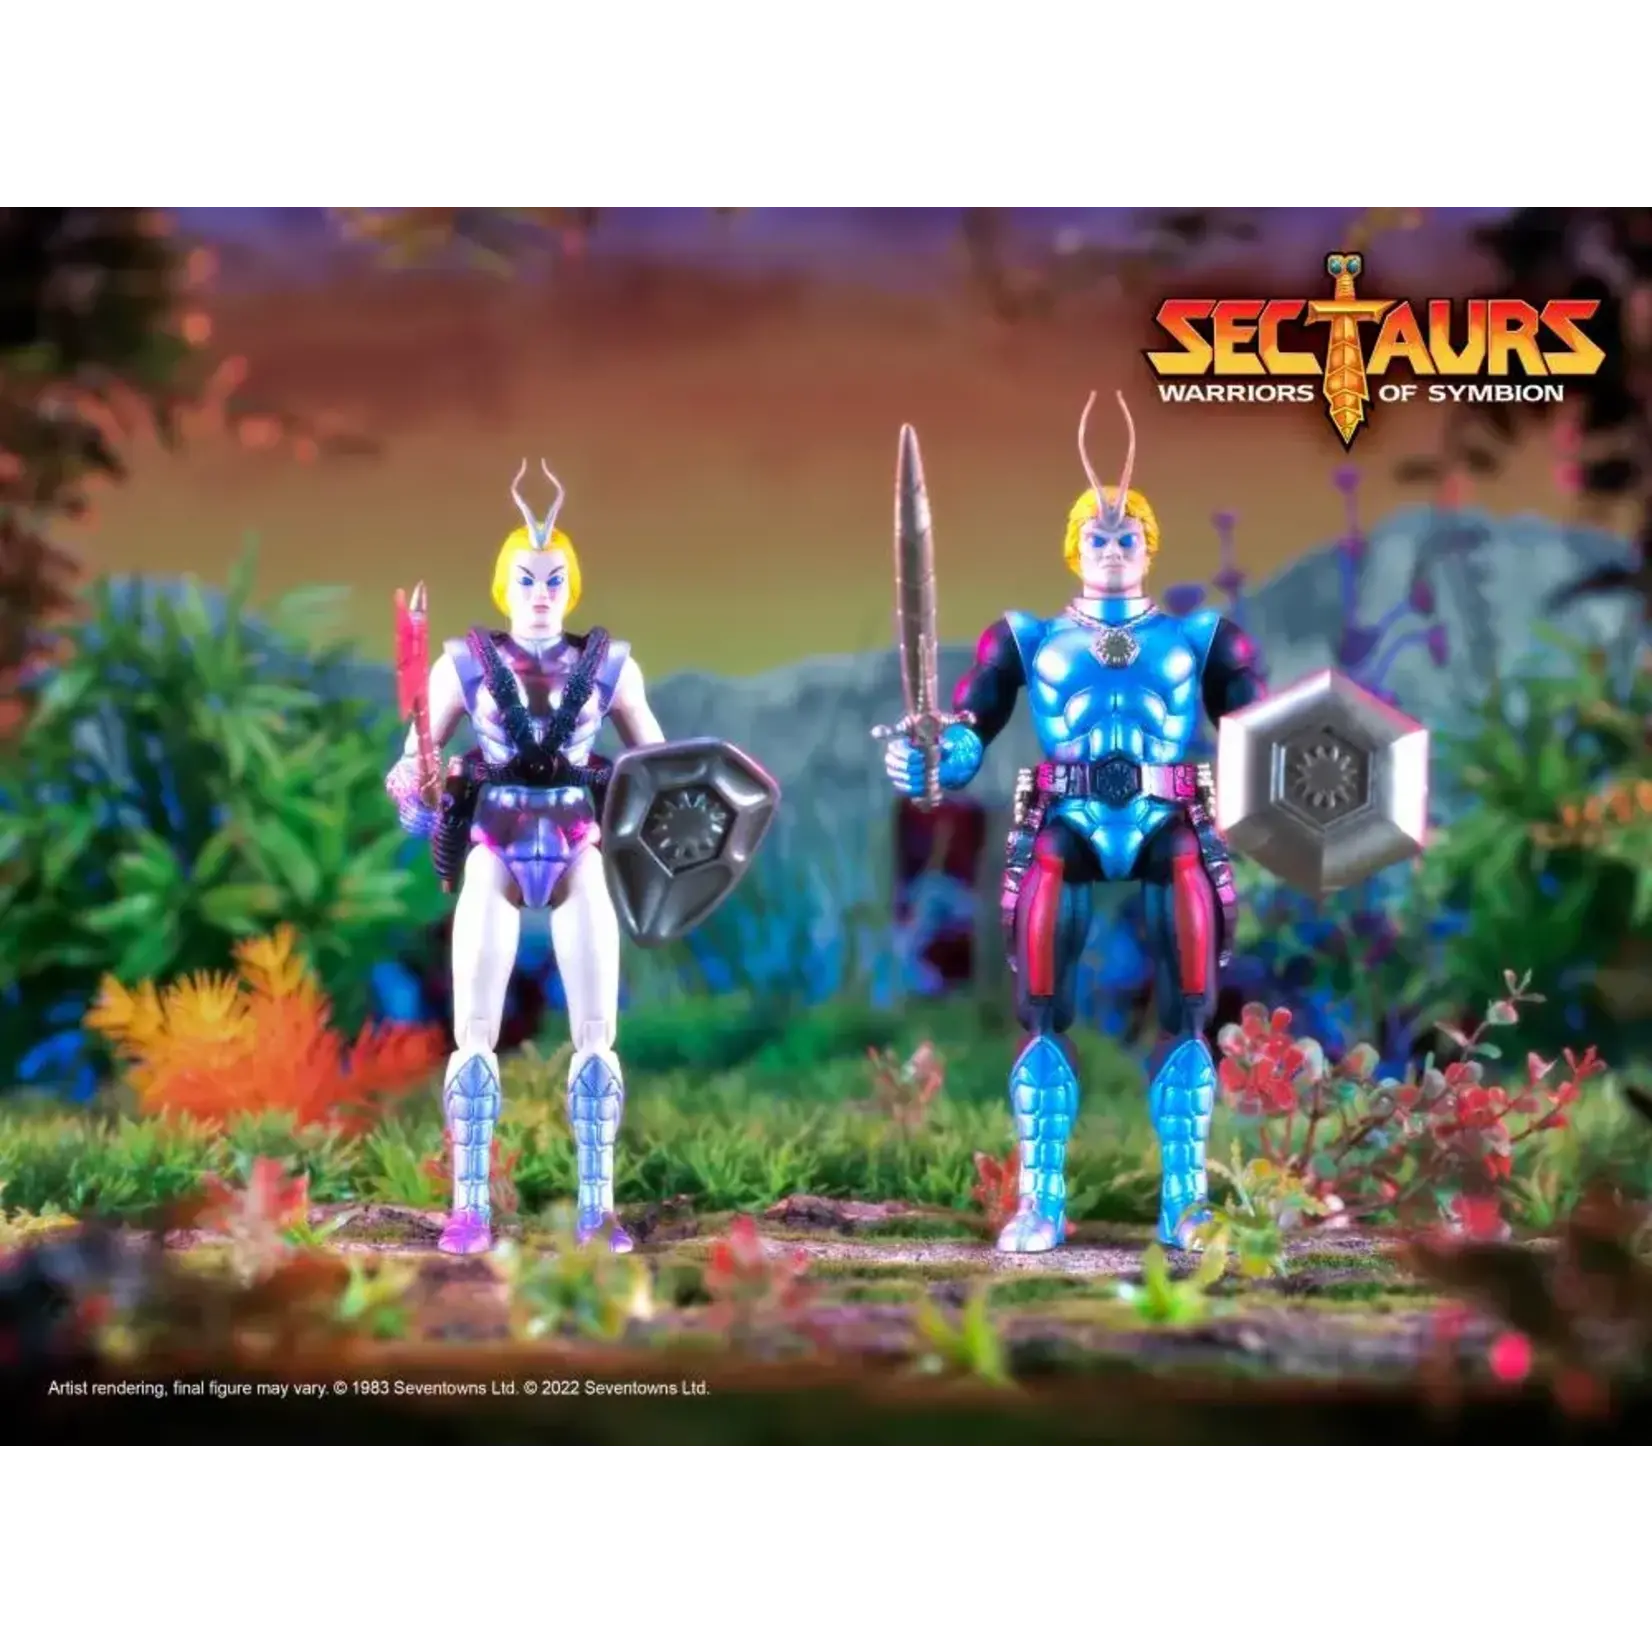 Sectaurs: Warriors of Symbion Sectaurs: Warriors of Symbion Dargon Action Figure